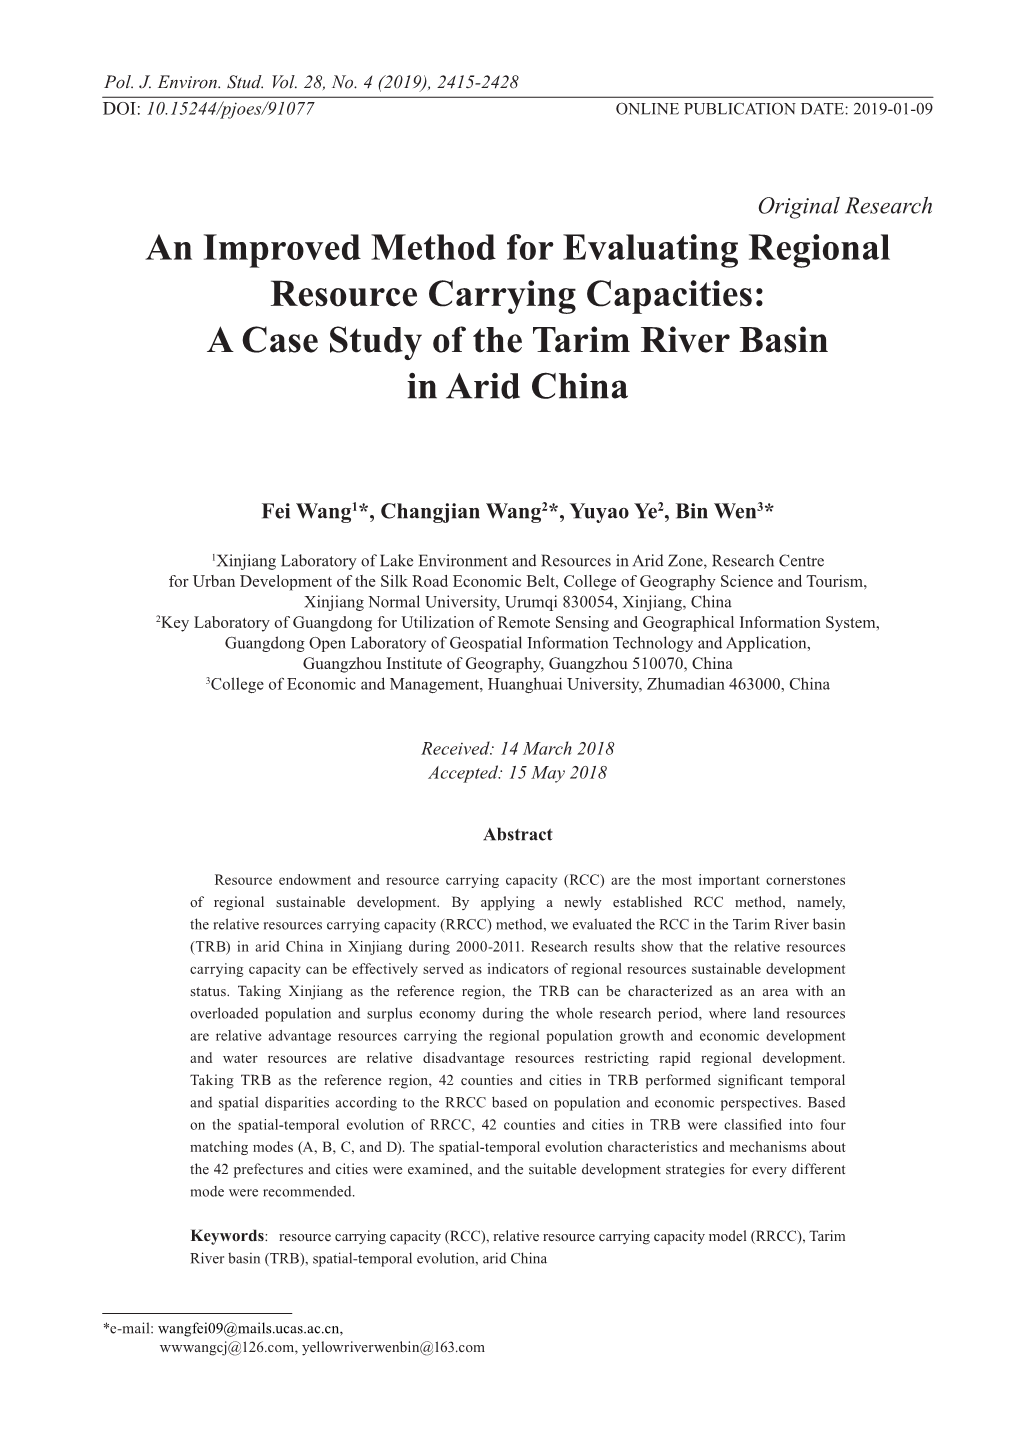 An Improved Method for Evaluating Regional Resource Carrying Capacities: a Case Study of the Tarim River Basin in Arid China